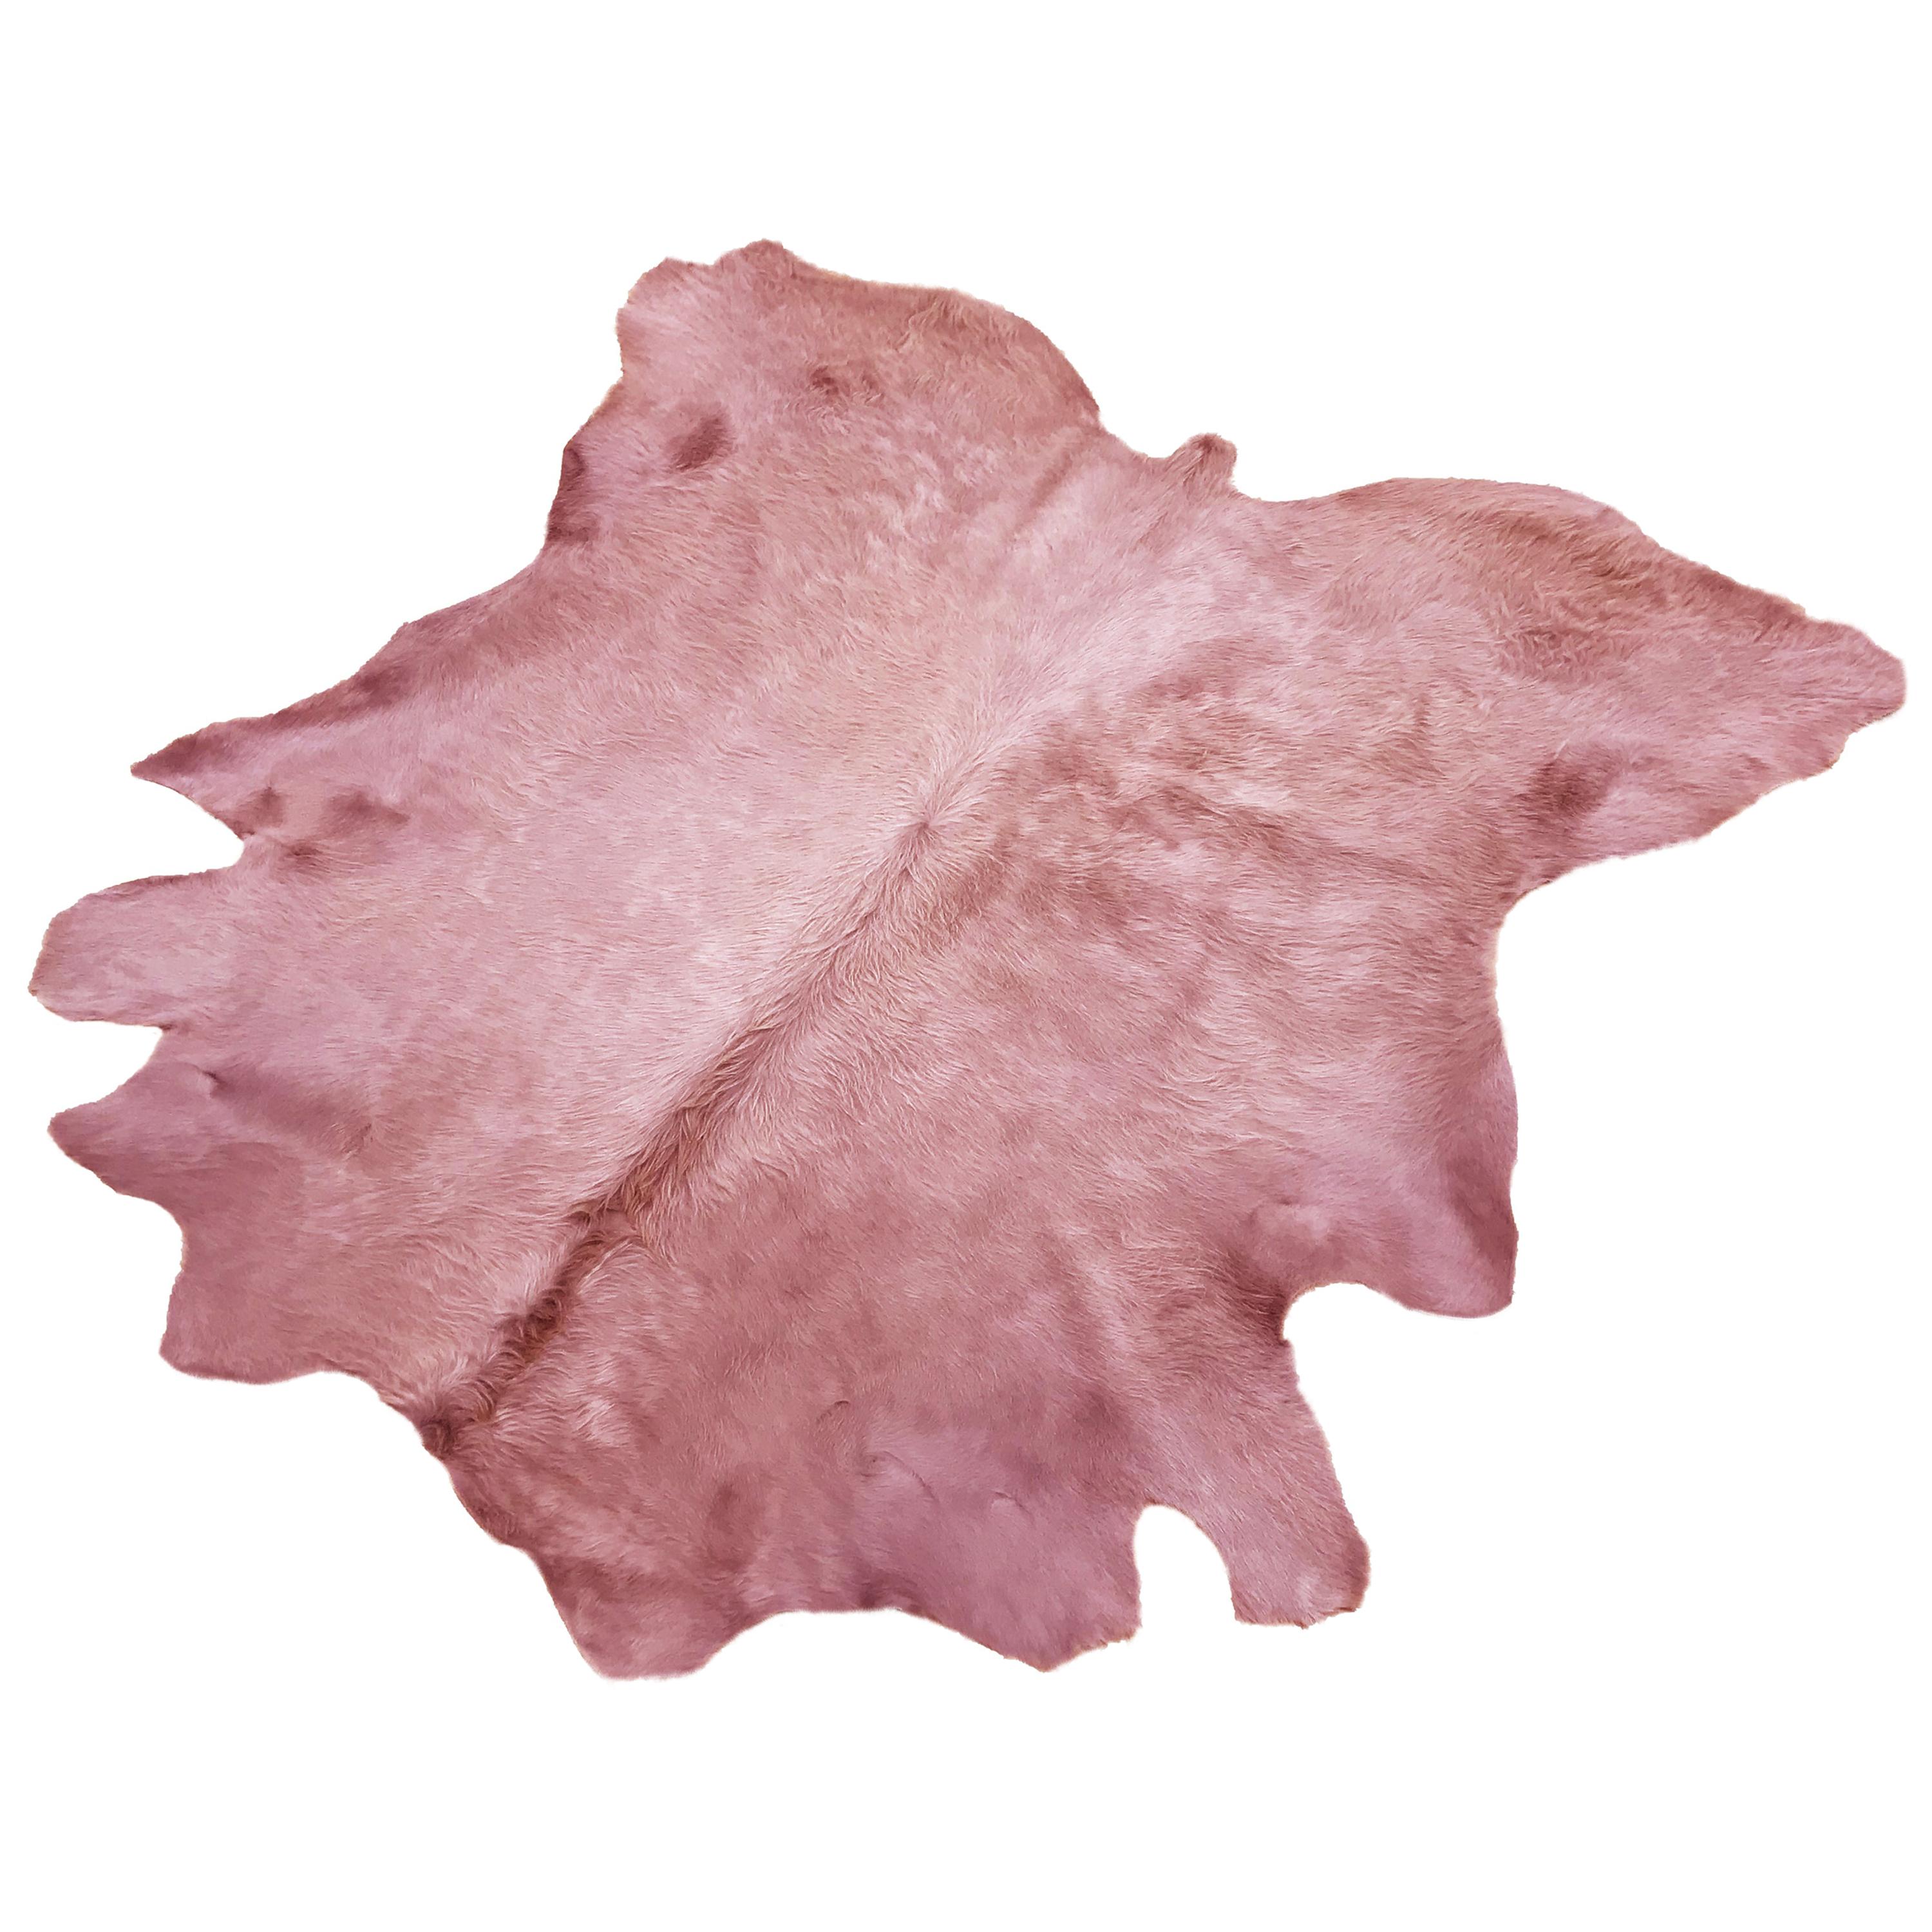 Cowhide Rug, Salmon Pink, Hand-Dyed, Sustainably Sourced, Variety of Colors For Sale